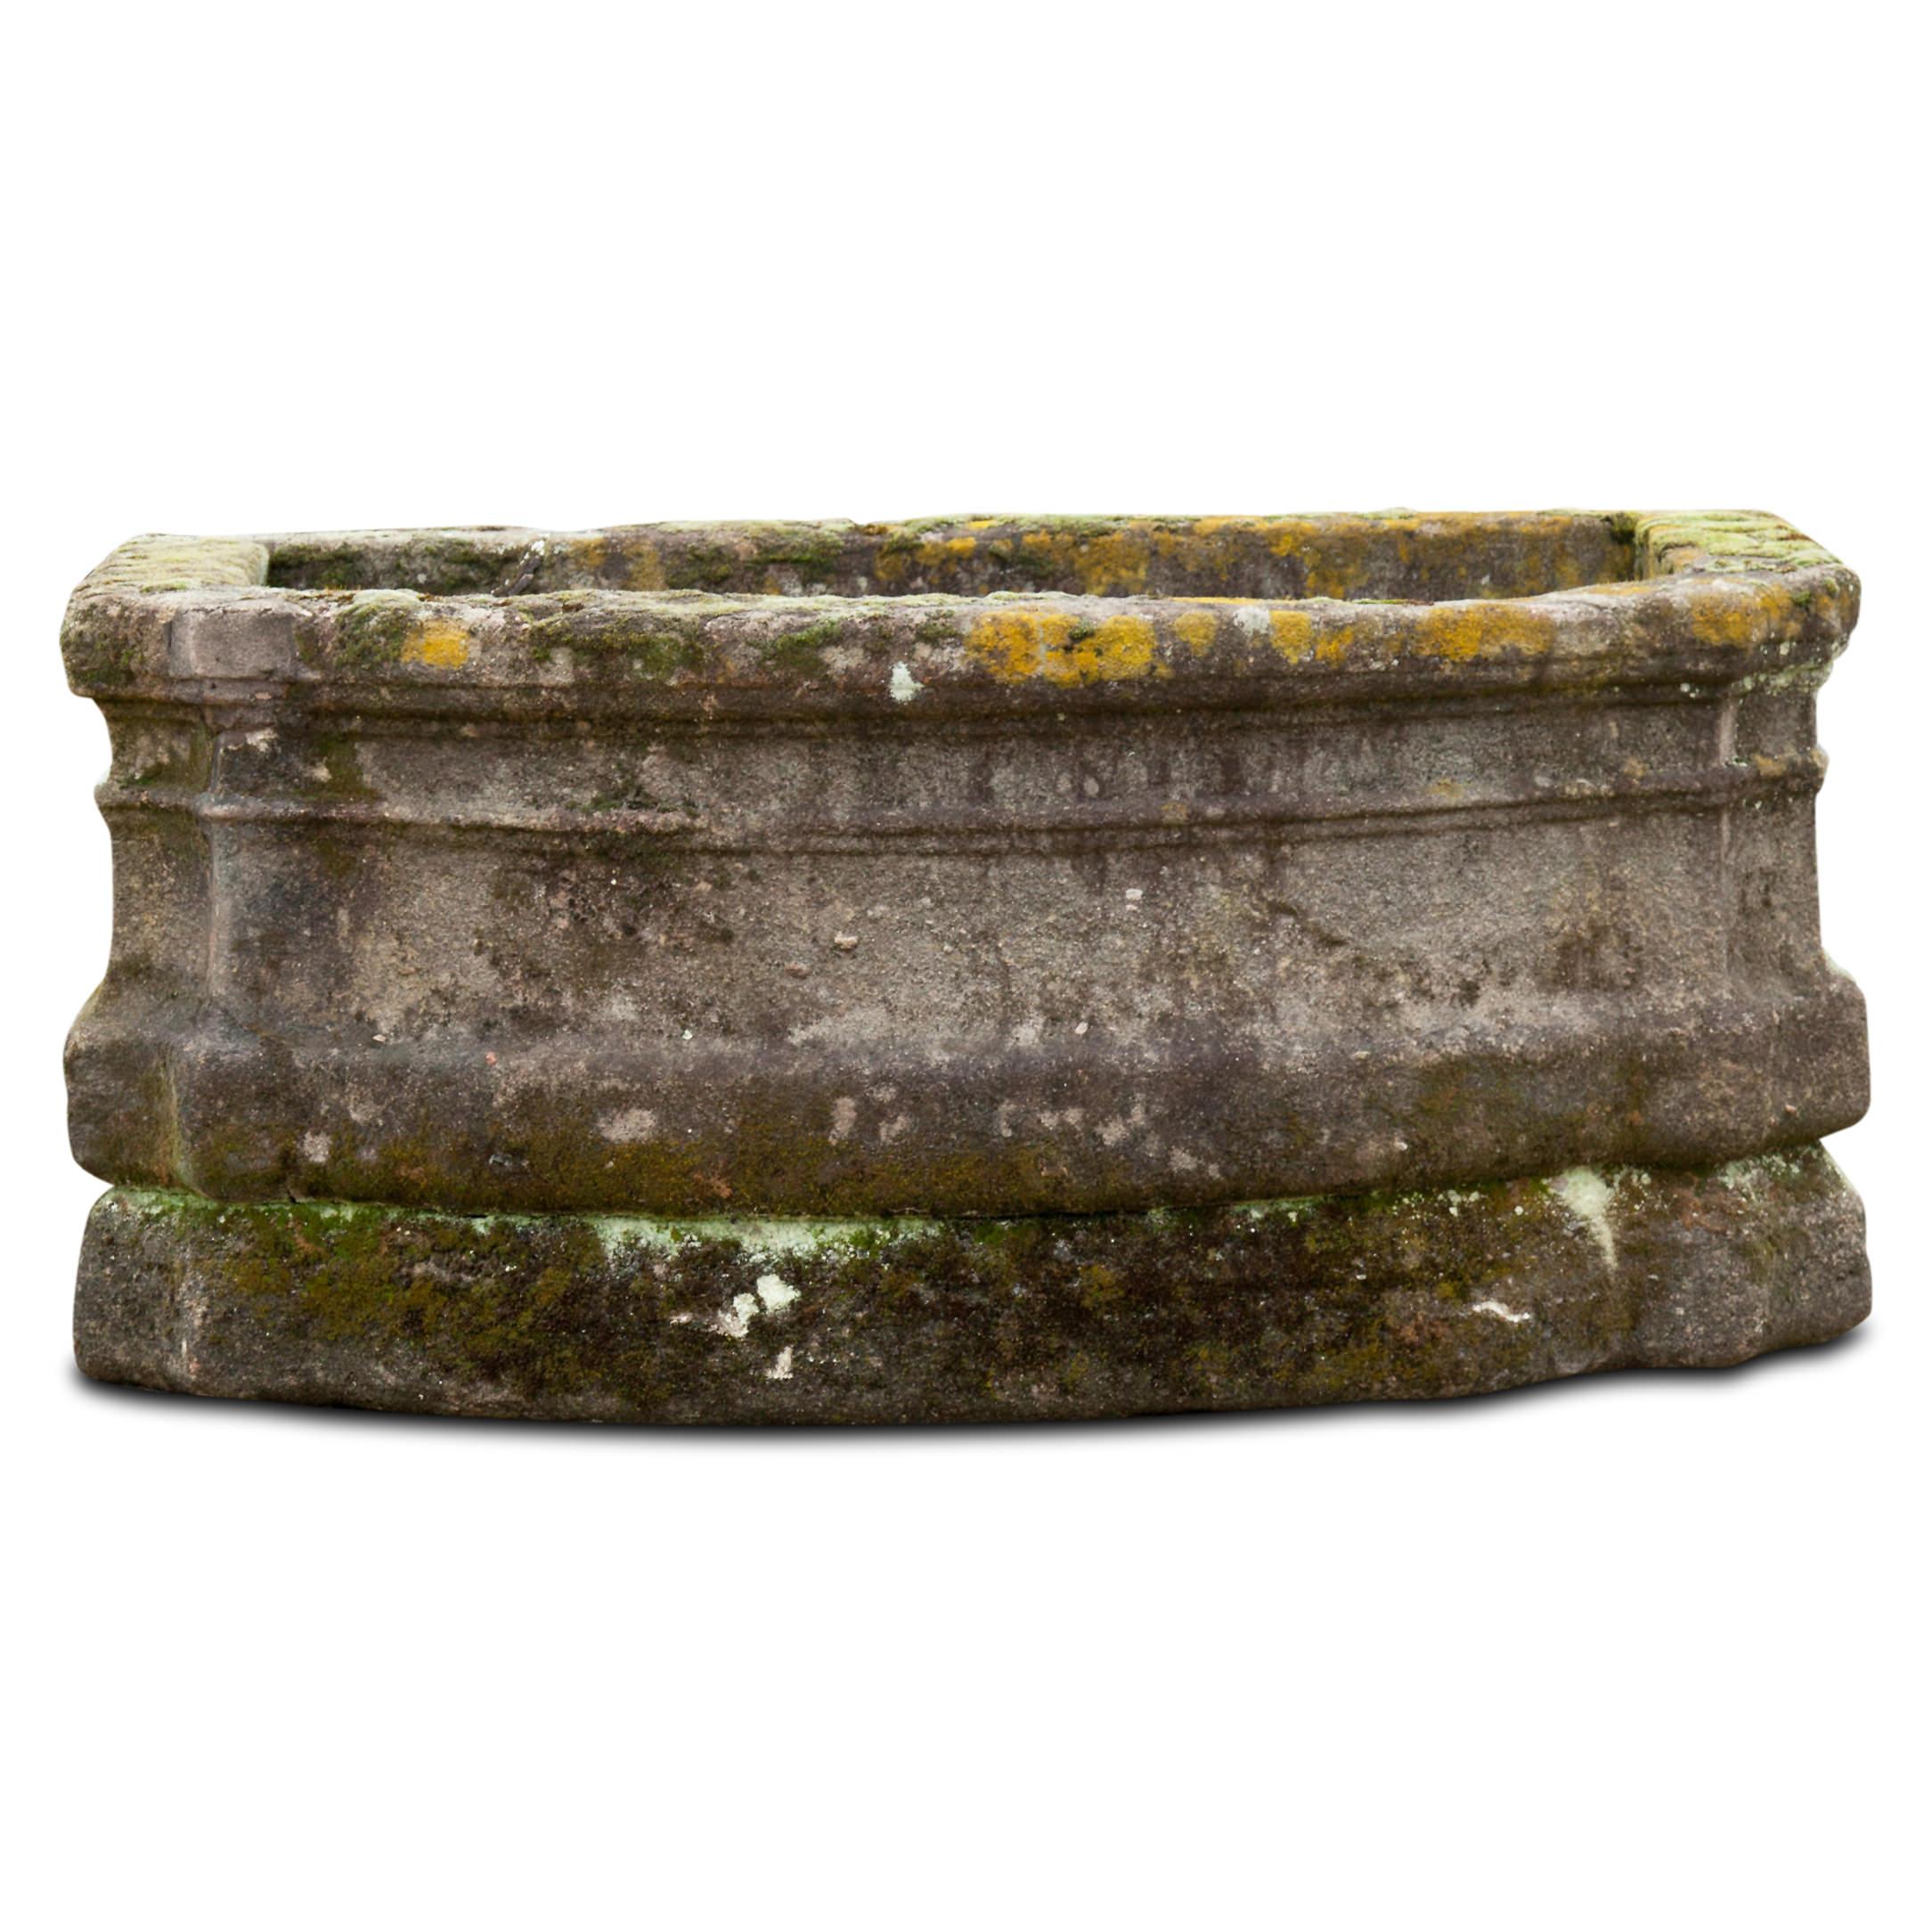 Large Baroque fountain basin made of sandstone with very beautiful profiled and slightly rounded walls. Excellent natural patina.